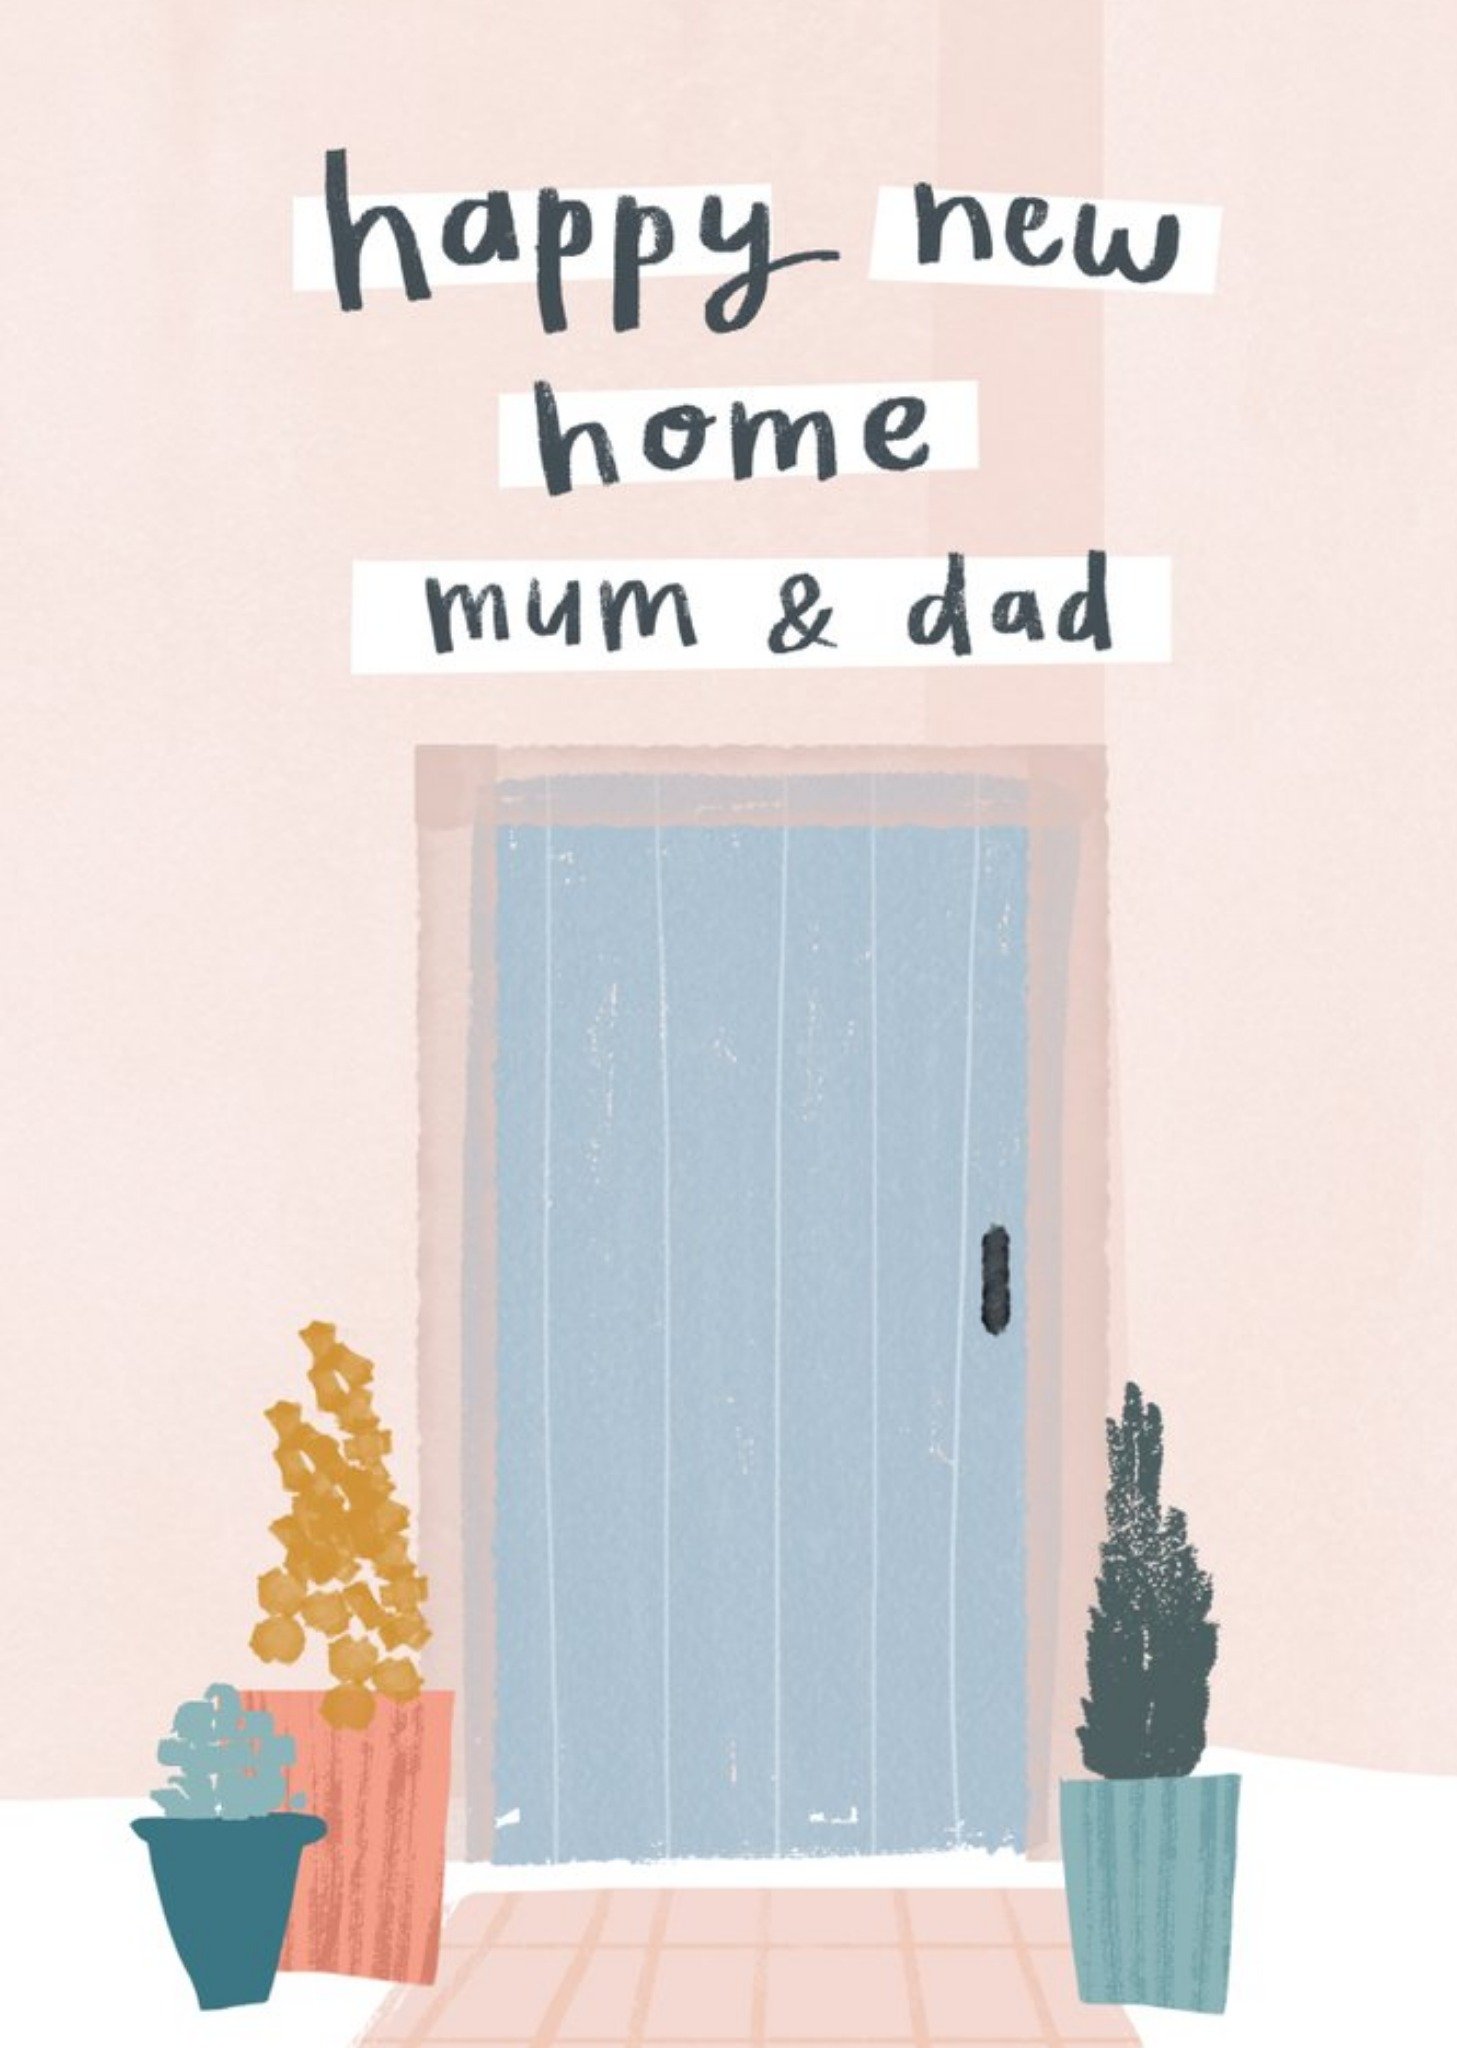 Moonpig Illustrated House Front Door Happy New Home Mum And Dad Card Ecard